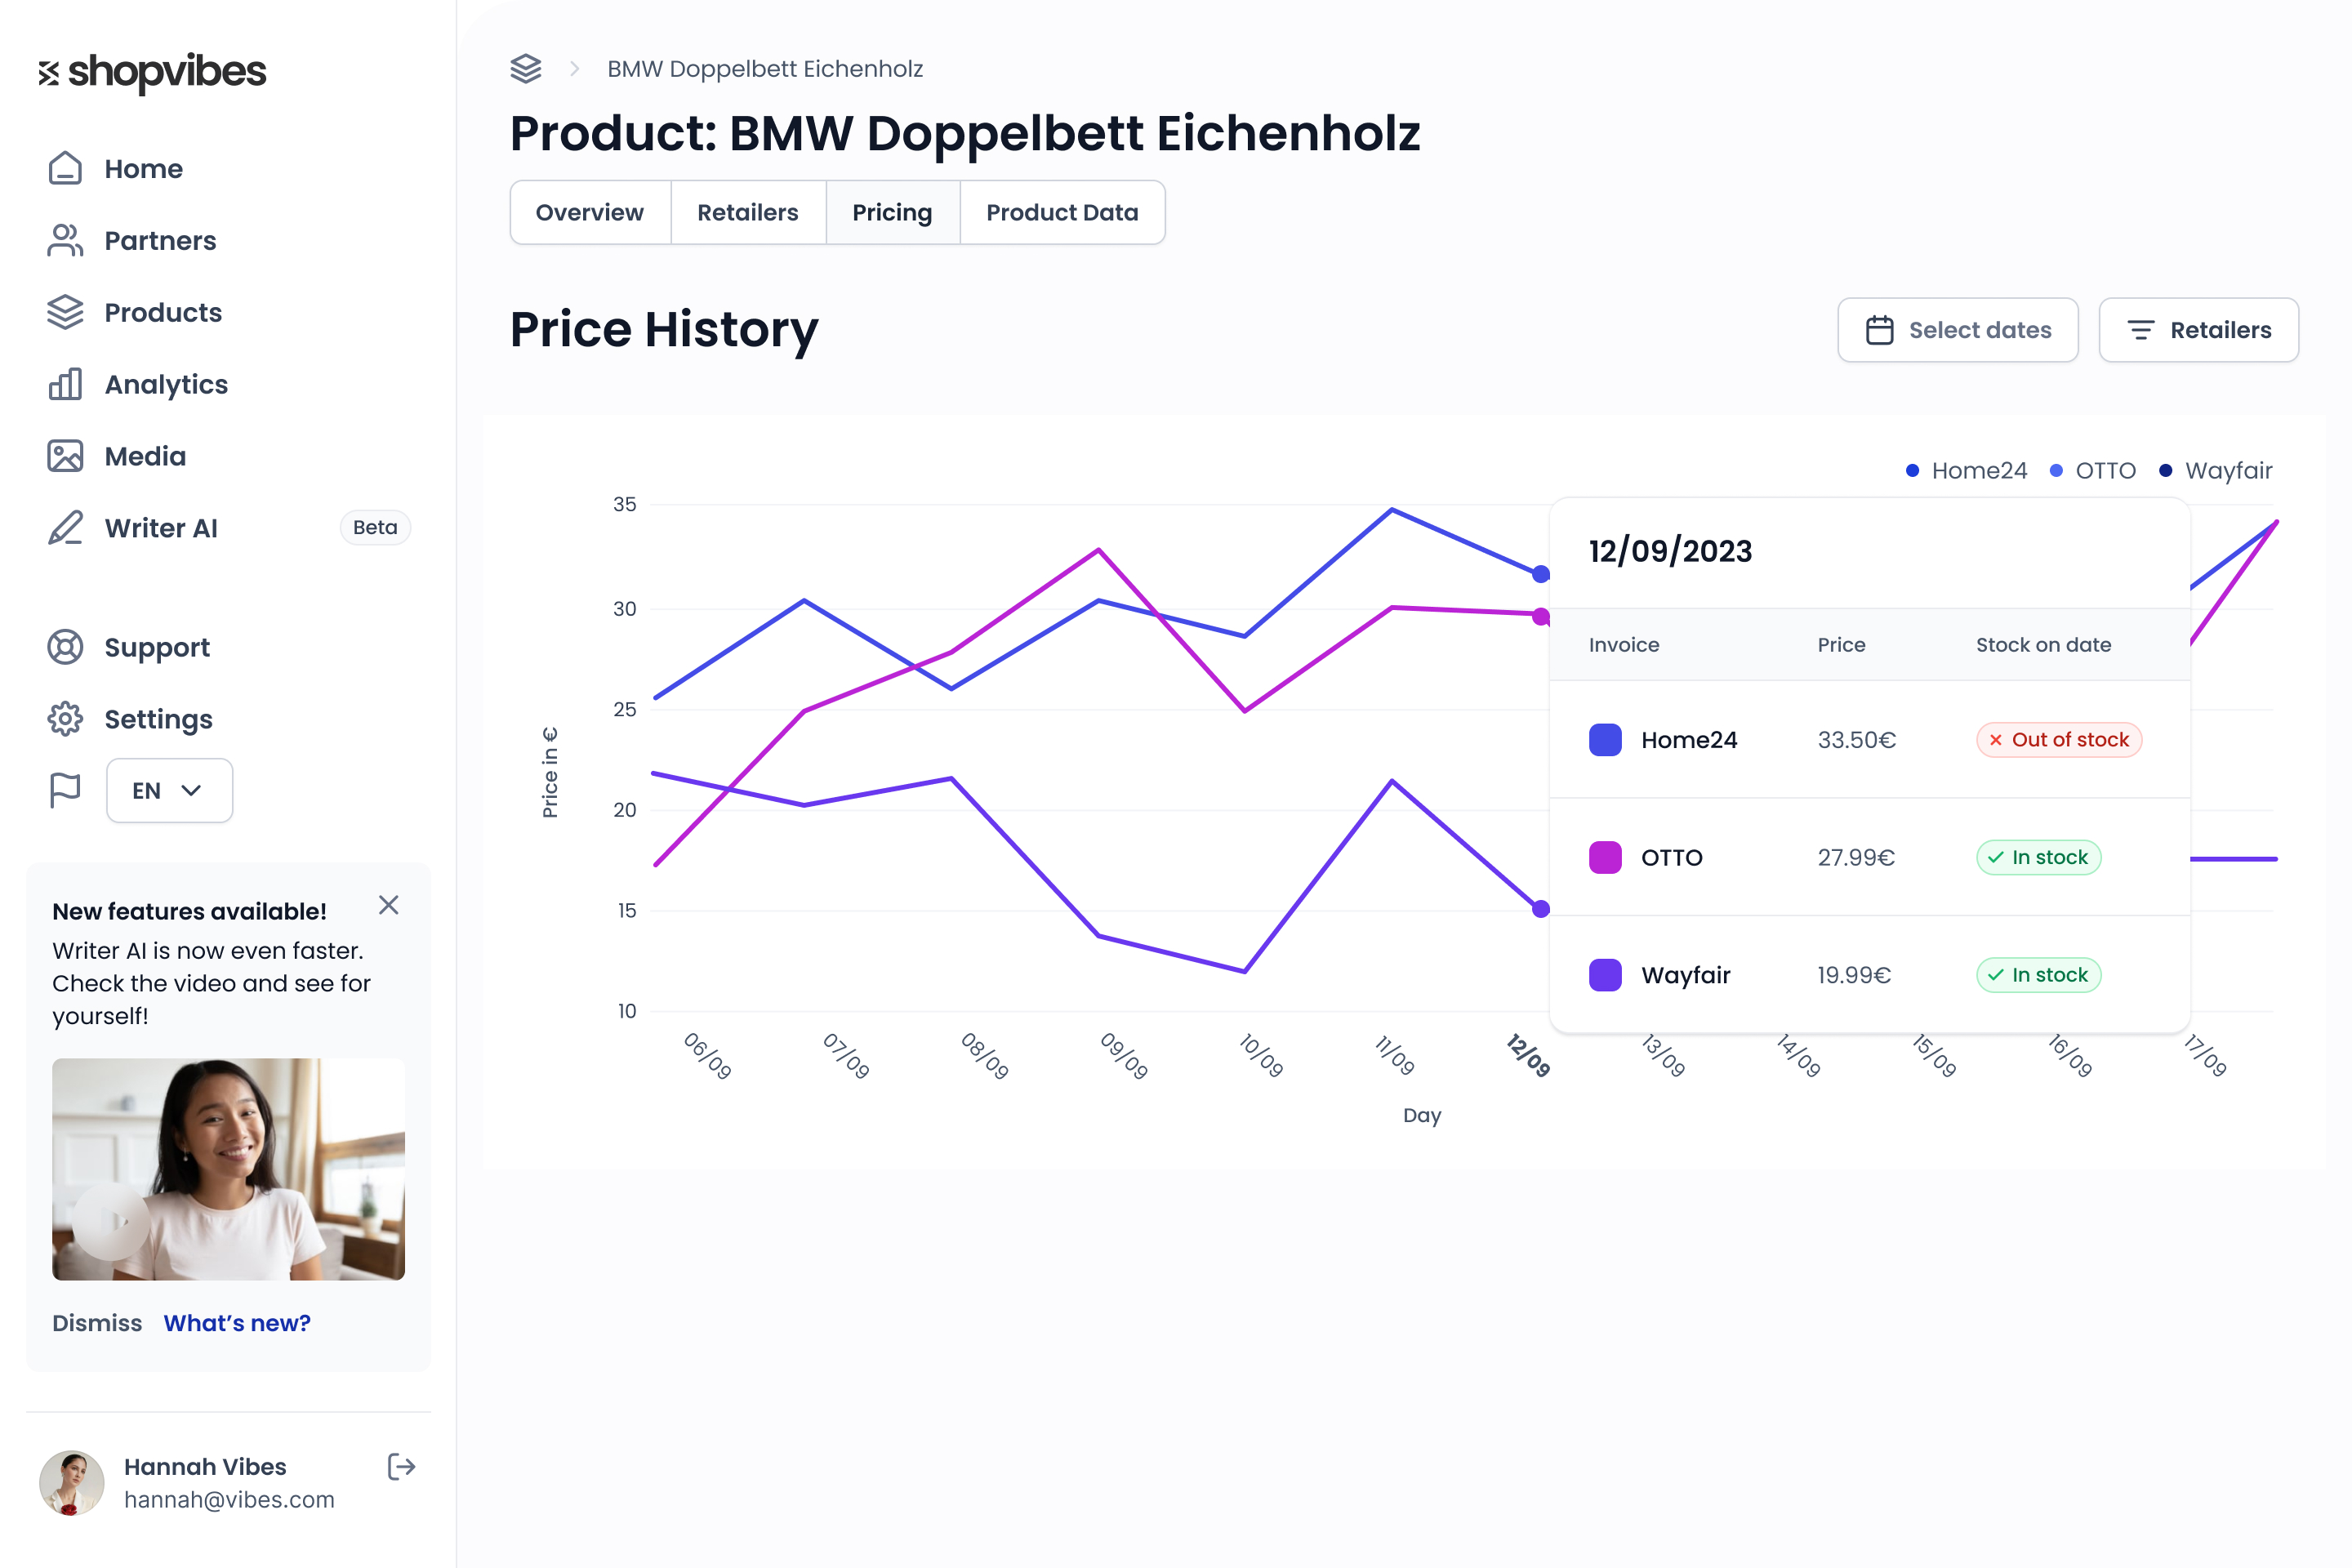 This tool enables you to track the price developement of your products on different retail partners.